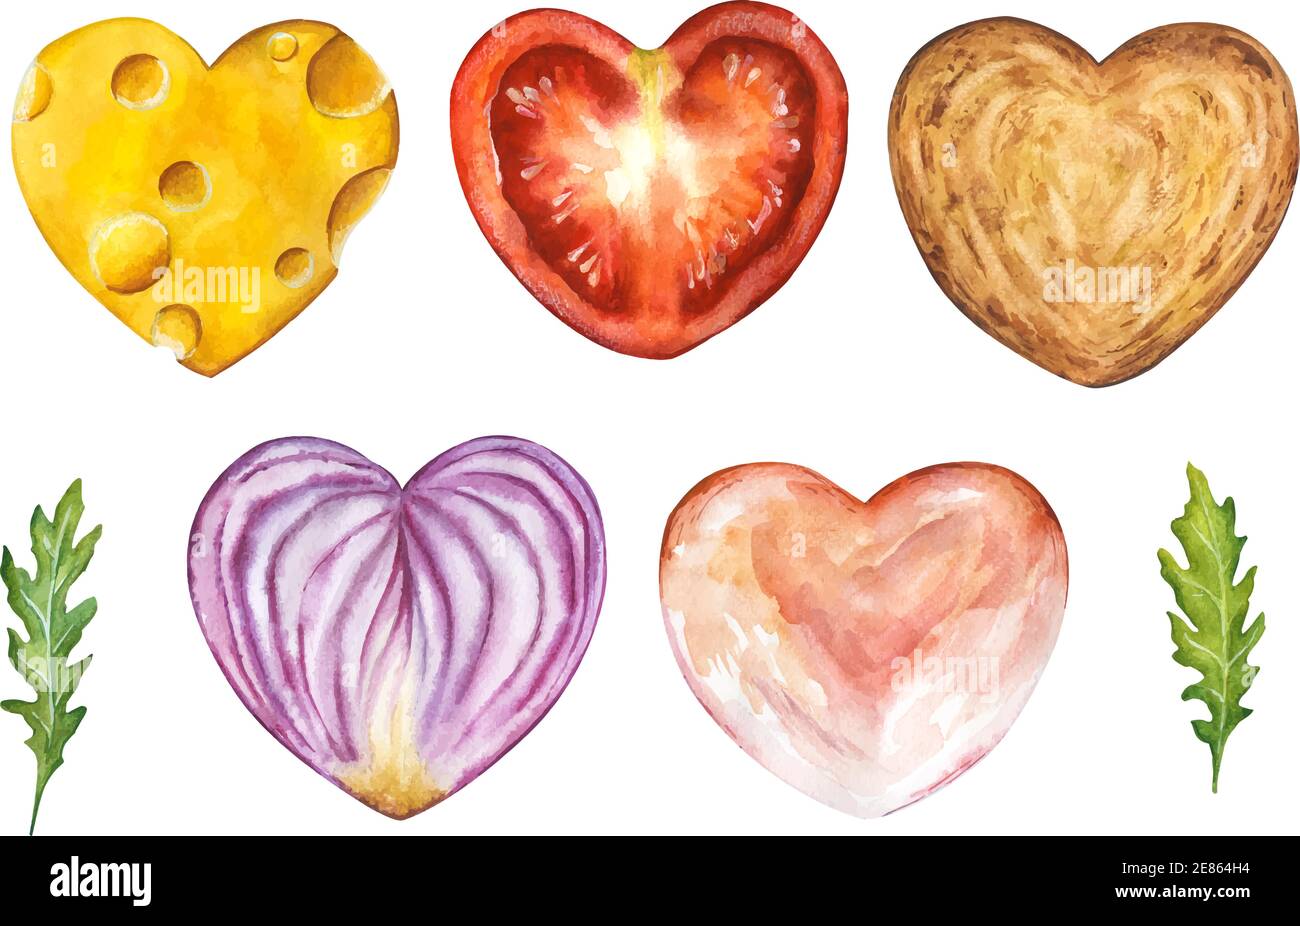 Watercolor set of sliced food hearts isolated on white background. Hand drawn illustration of heart shaped sandwich parts. Stock Vector